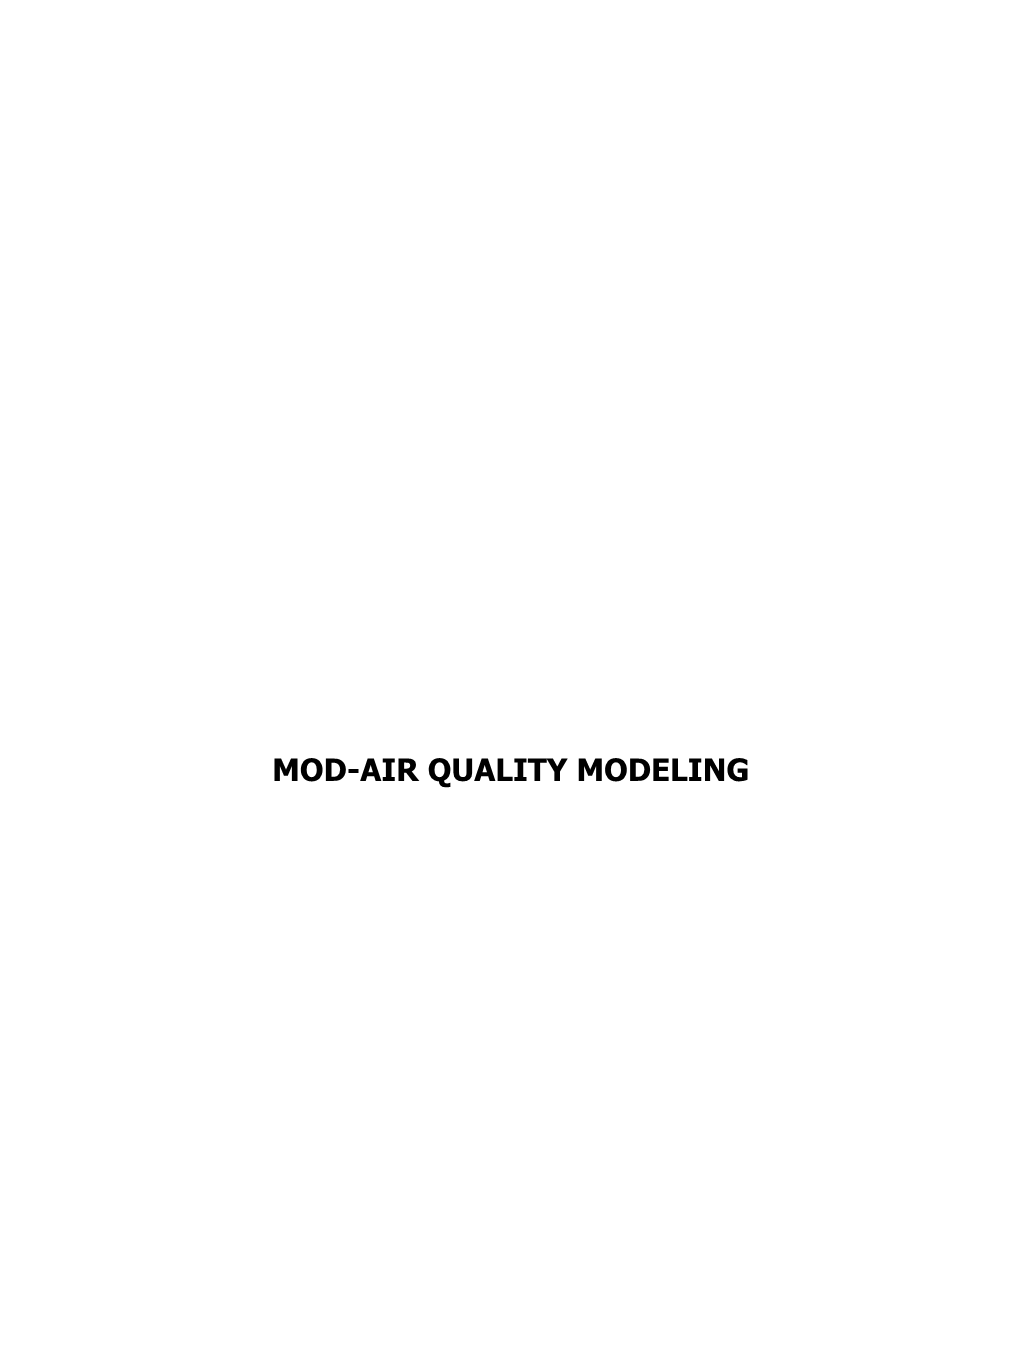 Mod-Air Quality Modeling